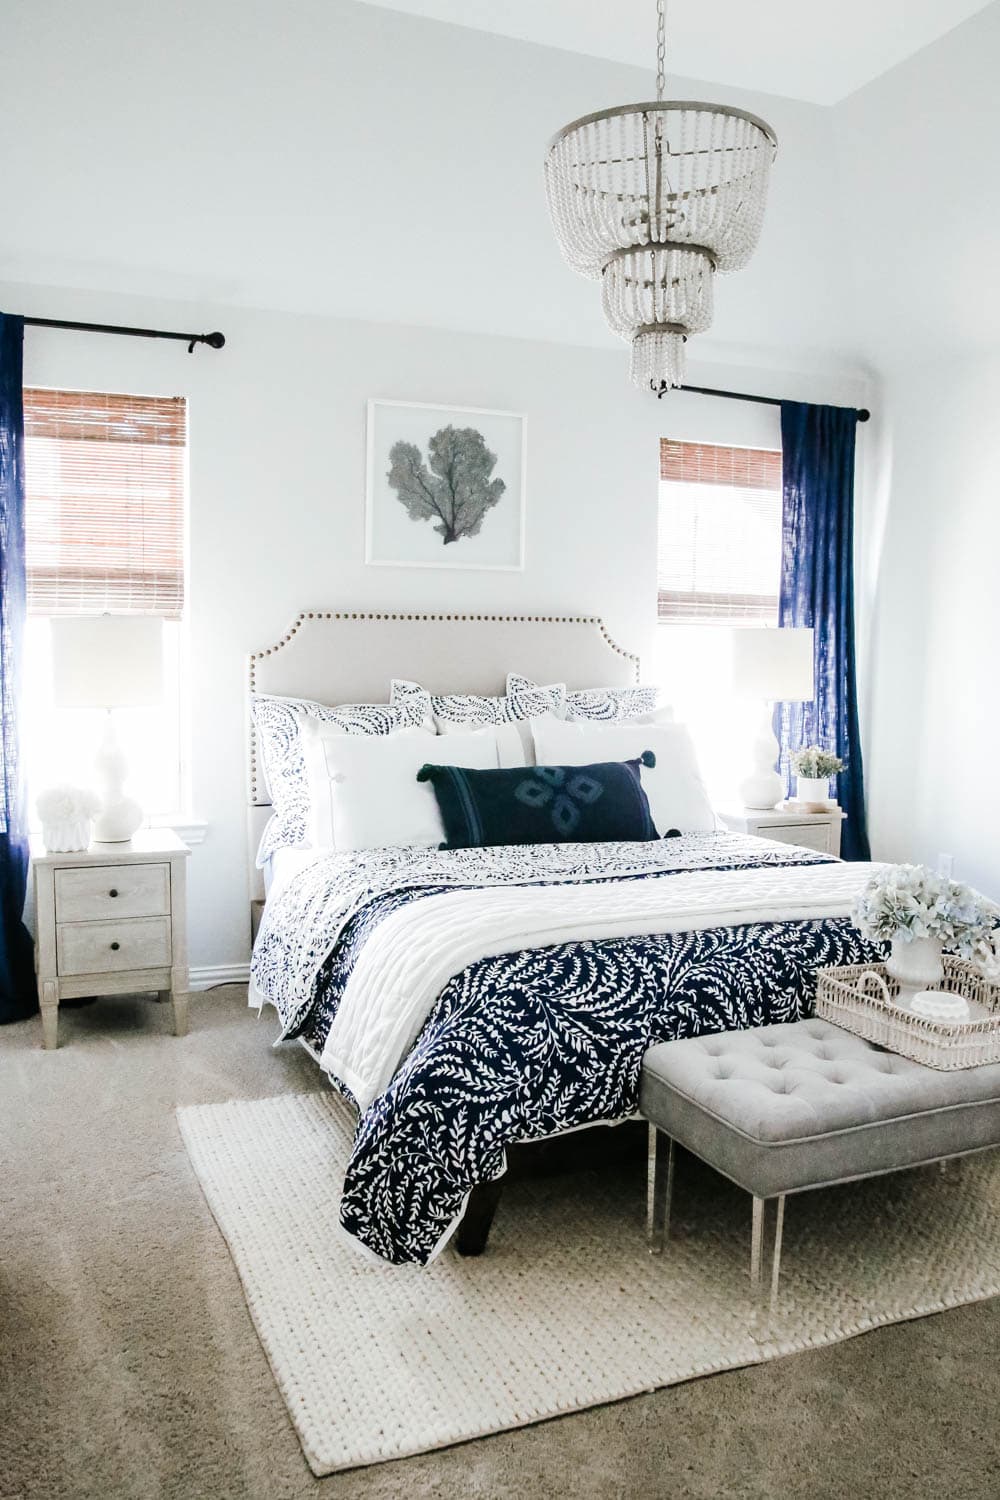 How to Make Your Guest Room Extra Cozy This Season